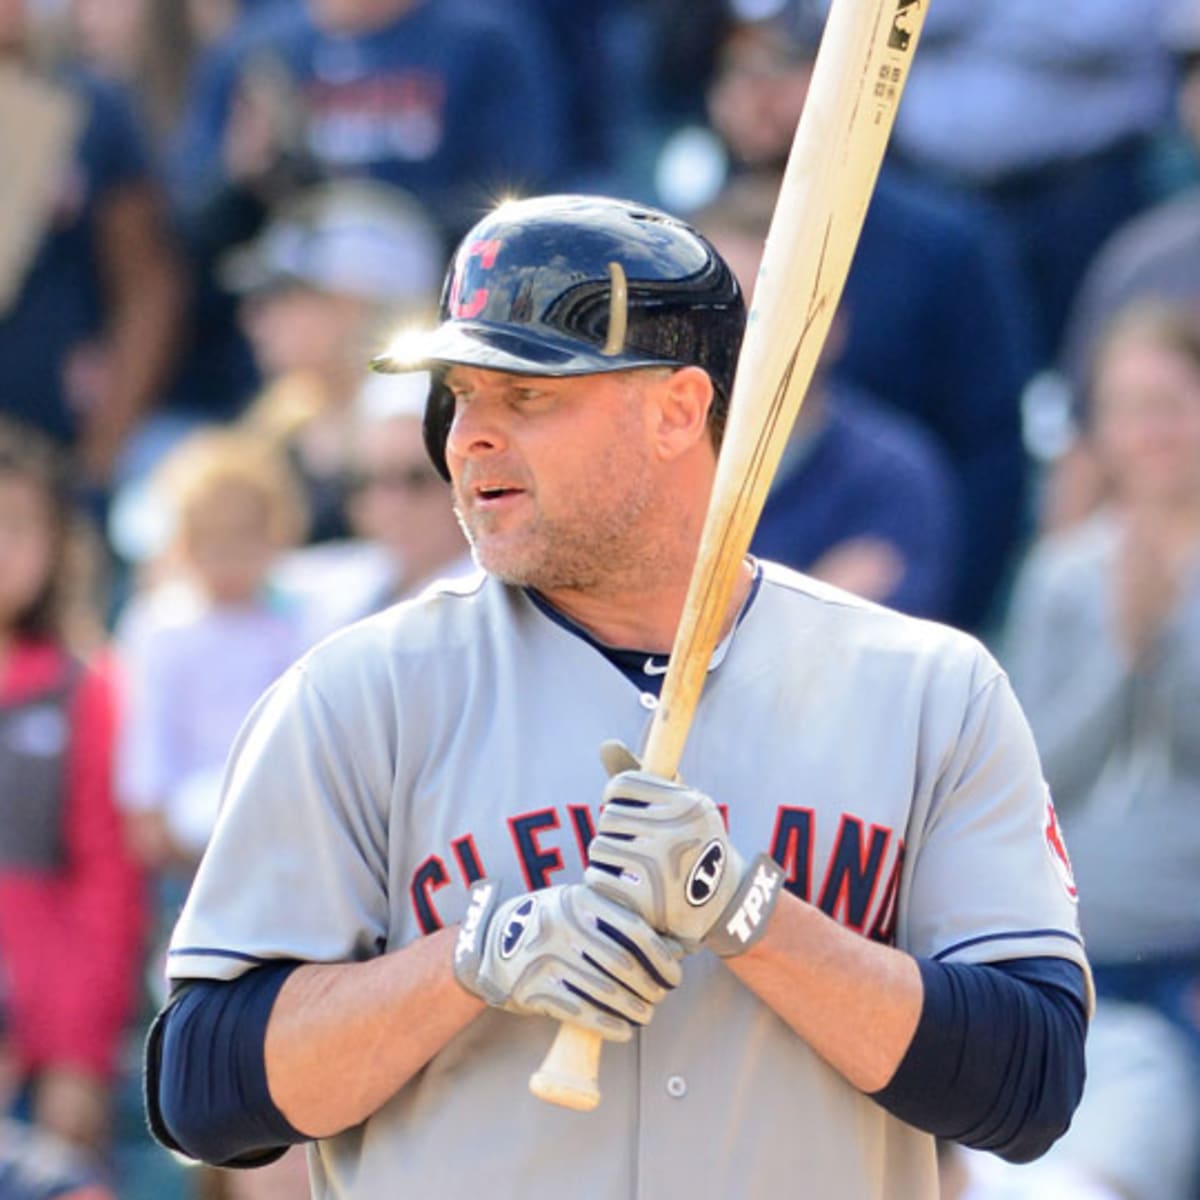 Jason Giambi retires after 20-year career - Sports Illustrated